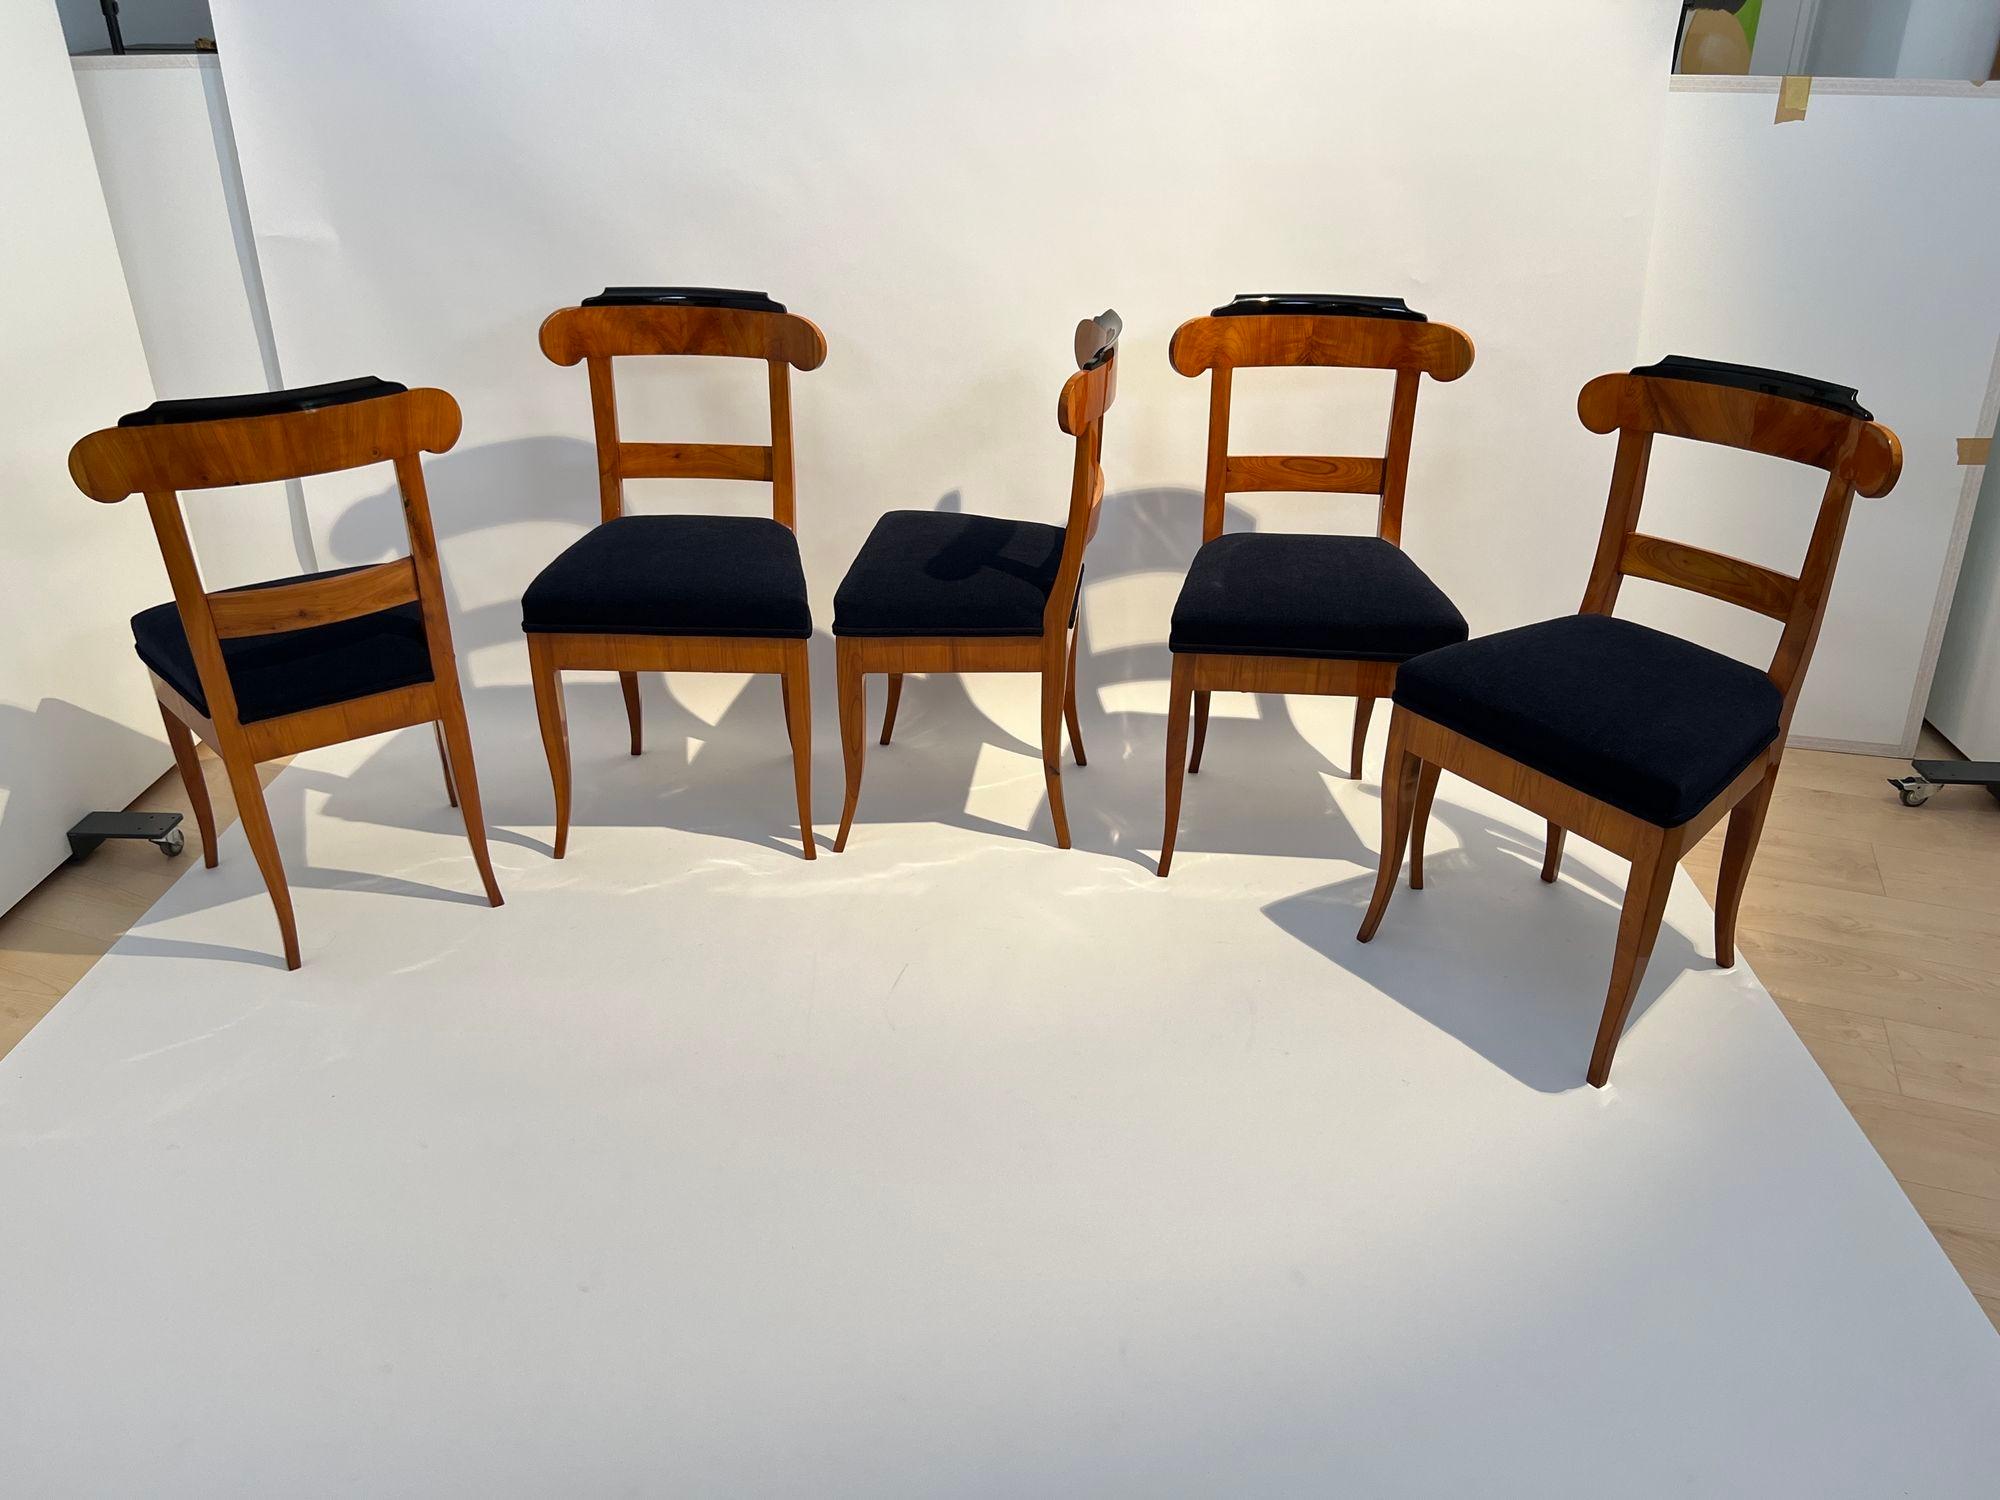 19th Century Set of Five Biedermeier Chairs, Cherry Wood, Germany circa 1830 For Sale